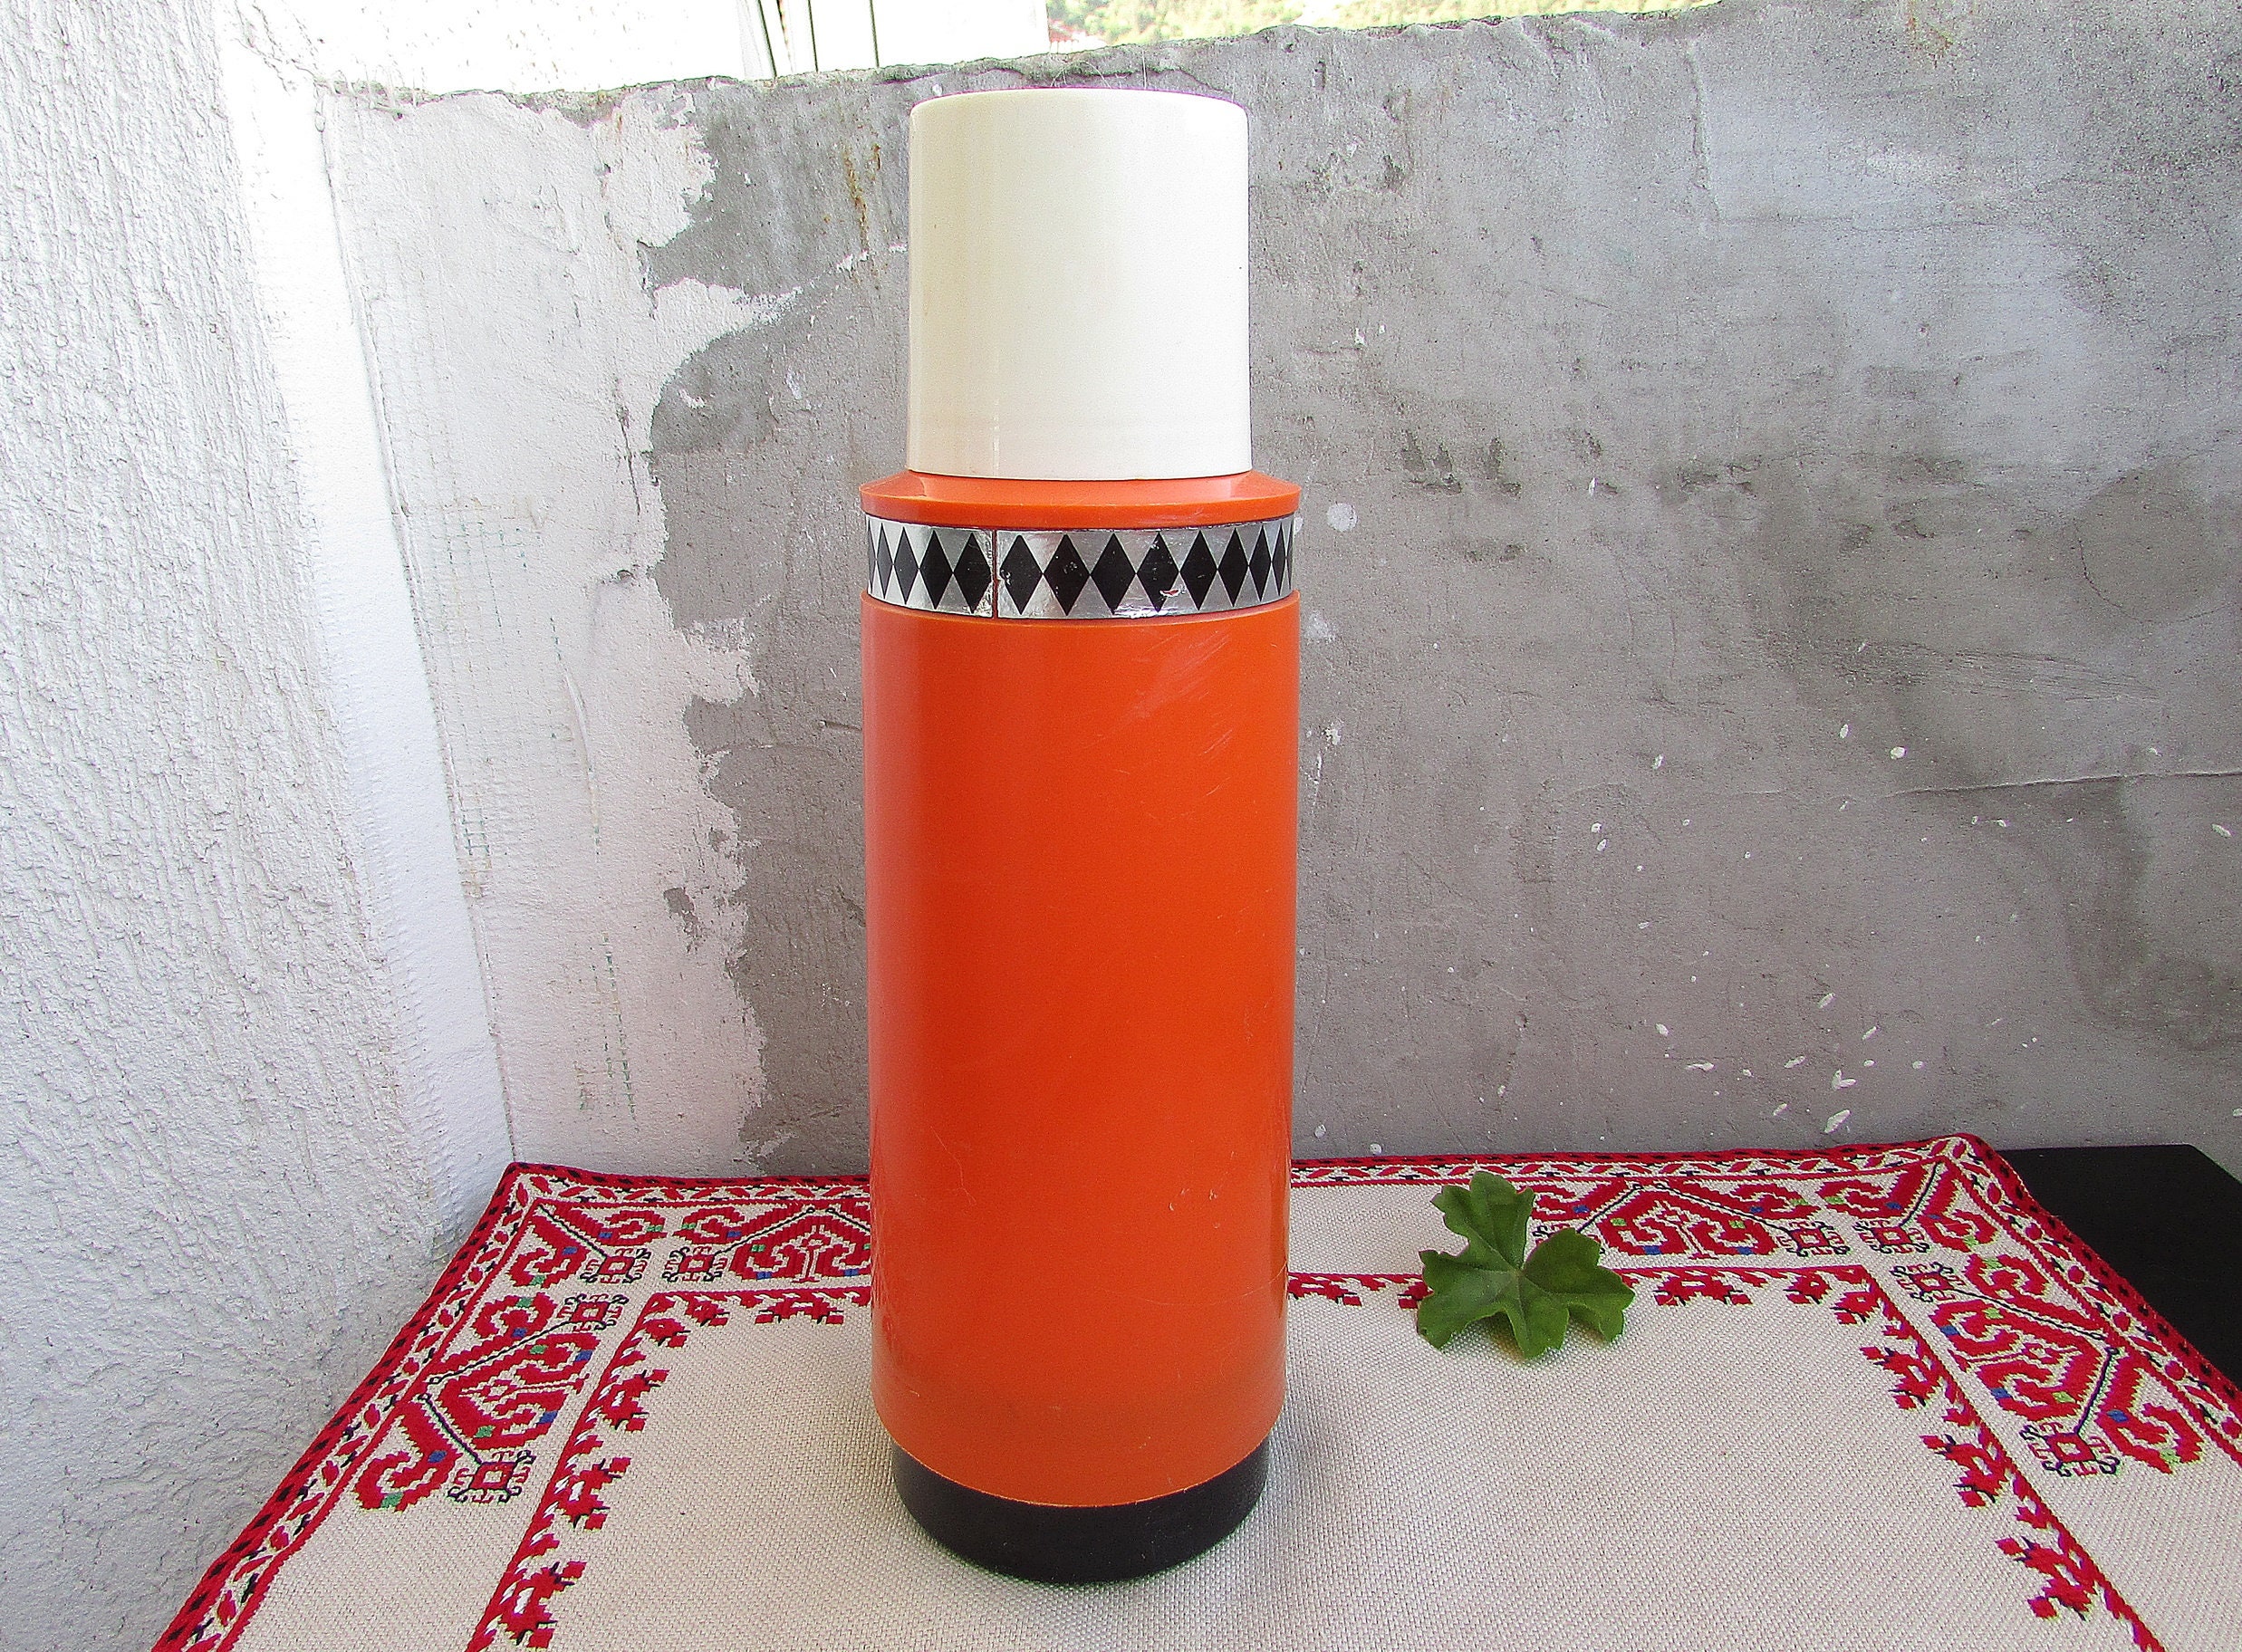 Vintage Plastic Thermos, Old Travel Thermos for Cold and Hot Drinks, Coffee  Tea Thermos, Camping Equipment, Retro Collectible Thermos -  Hong Kong